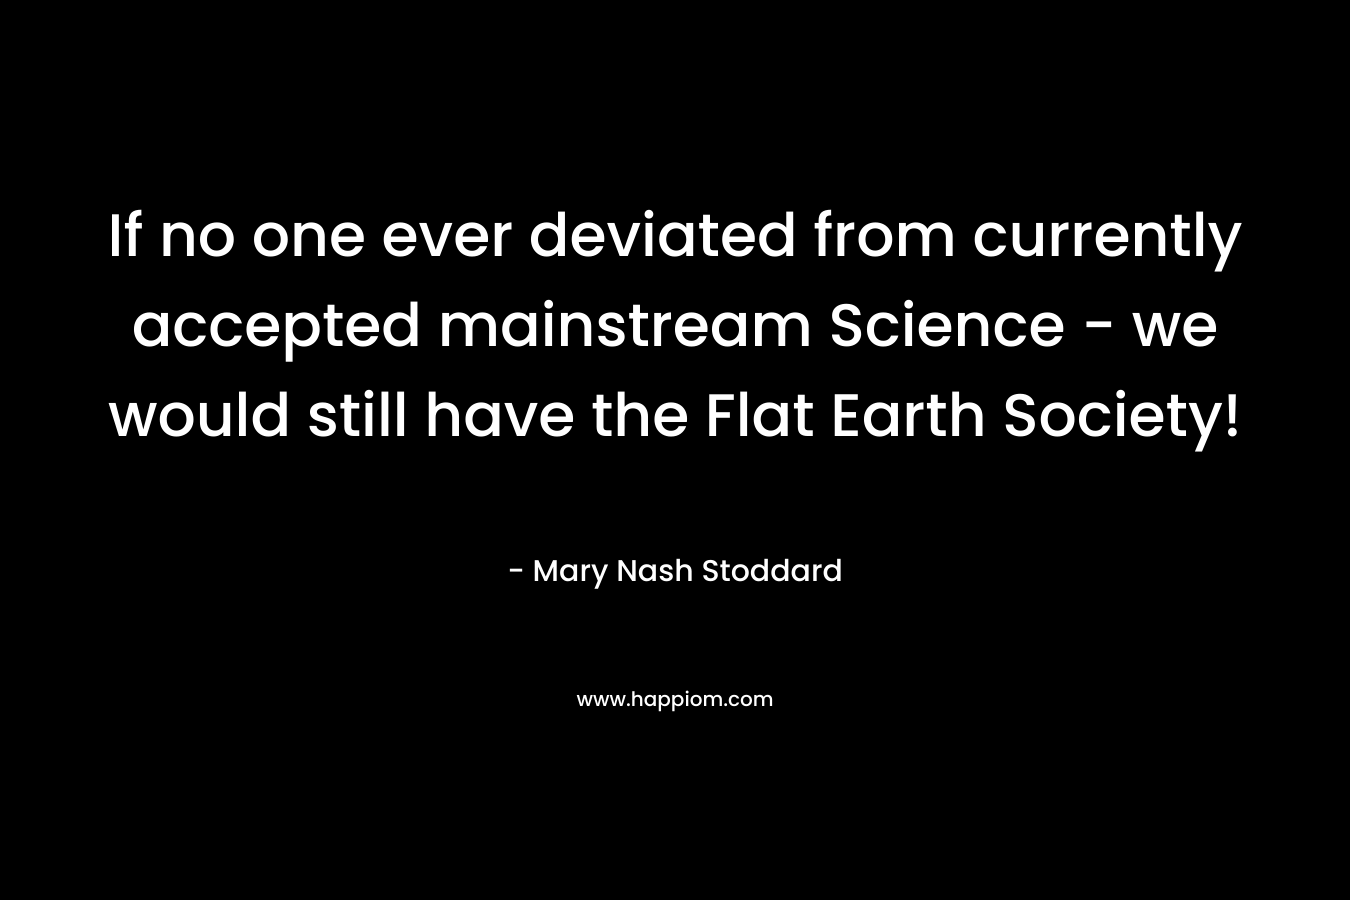 If no one ever deviated from currently accepted mainstream Science - we would still have the Flat Earth Society!